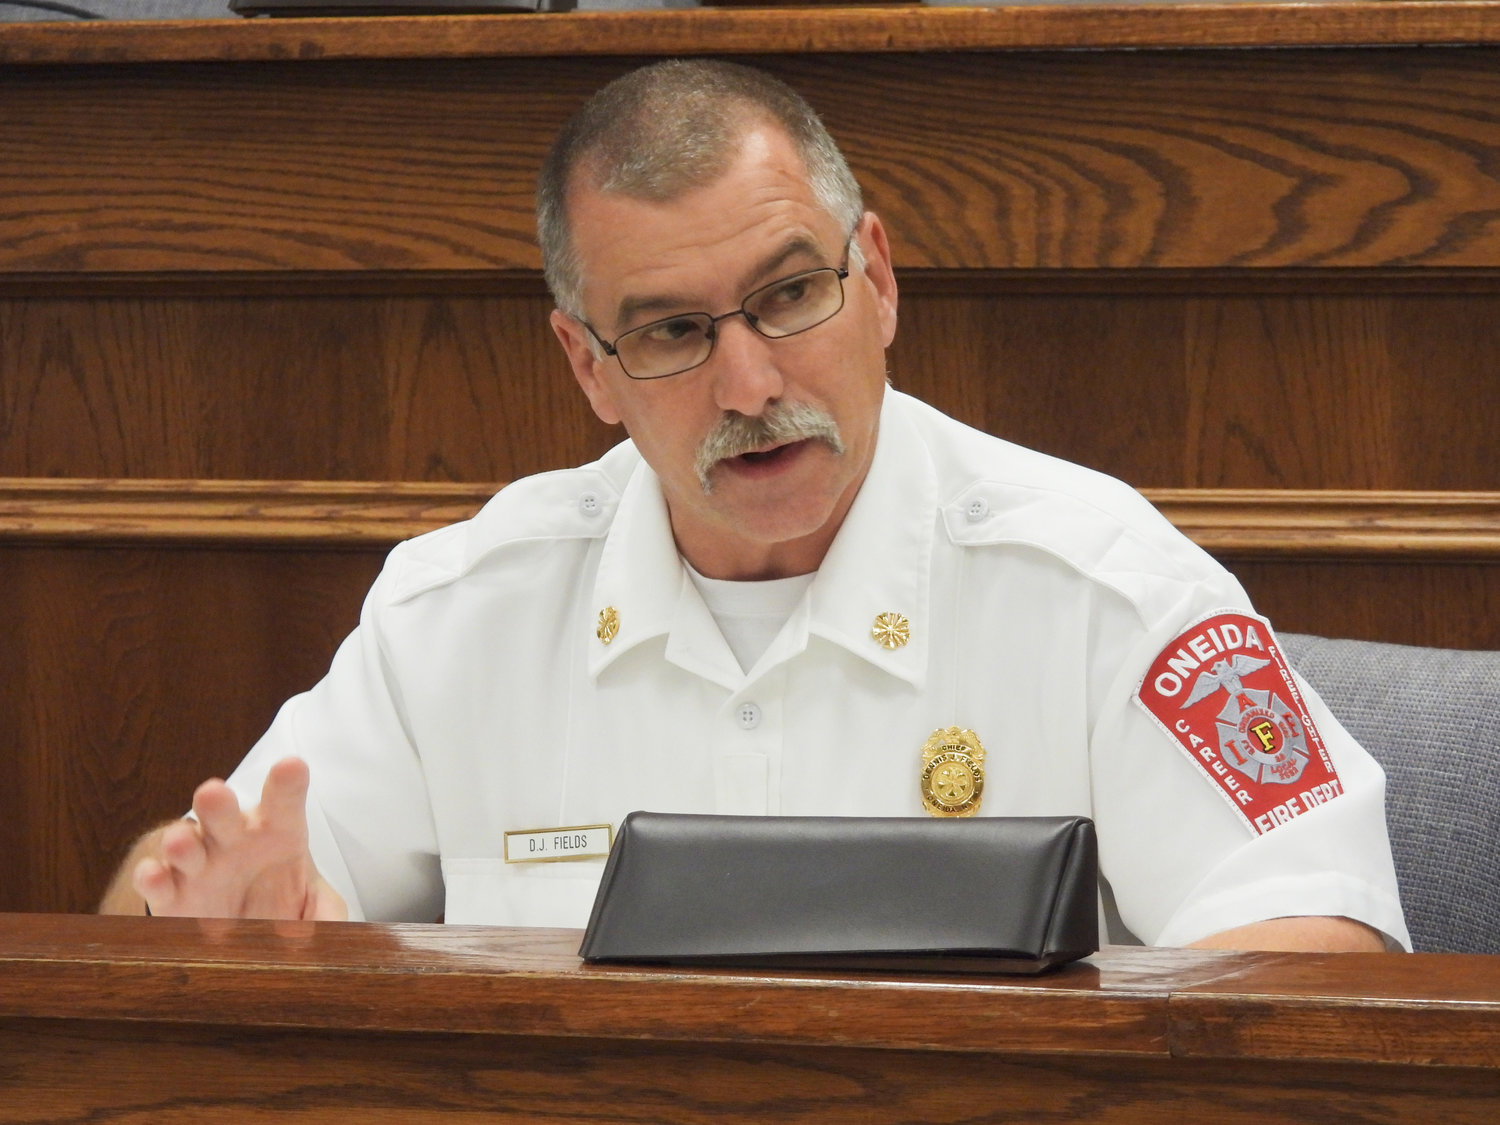 Fire Chief Dennis Fields speaks at the Oneida City Budget Meeting on Wednesday, Nov. 3